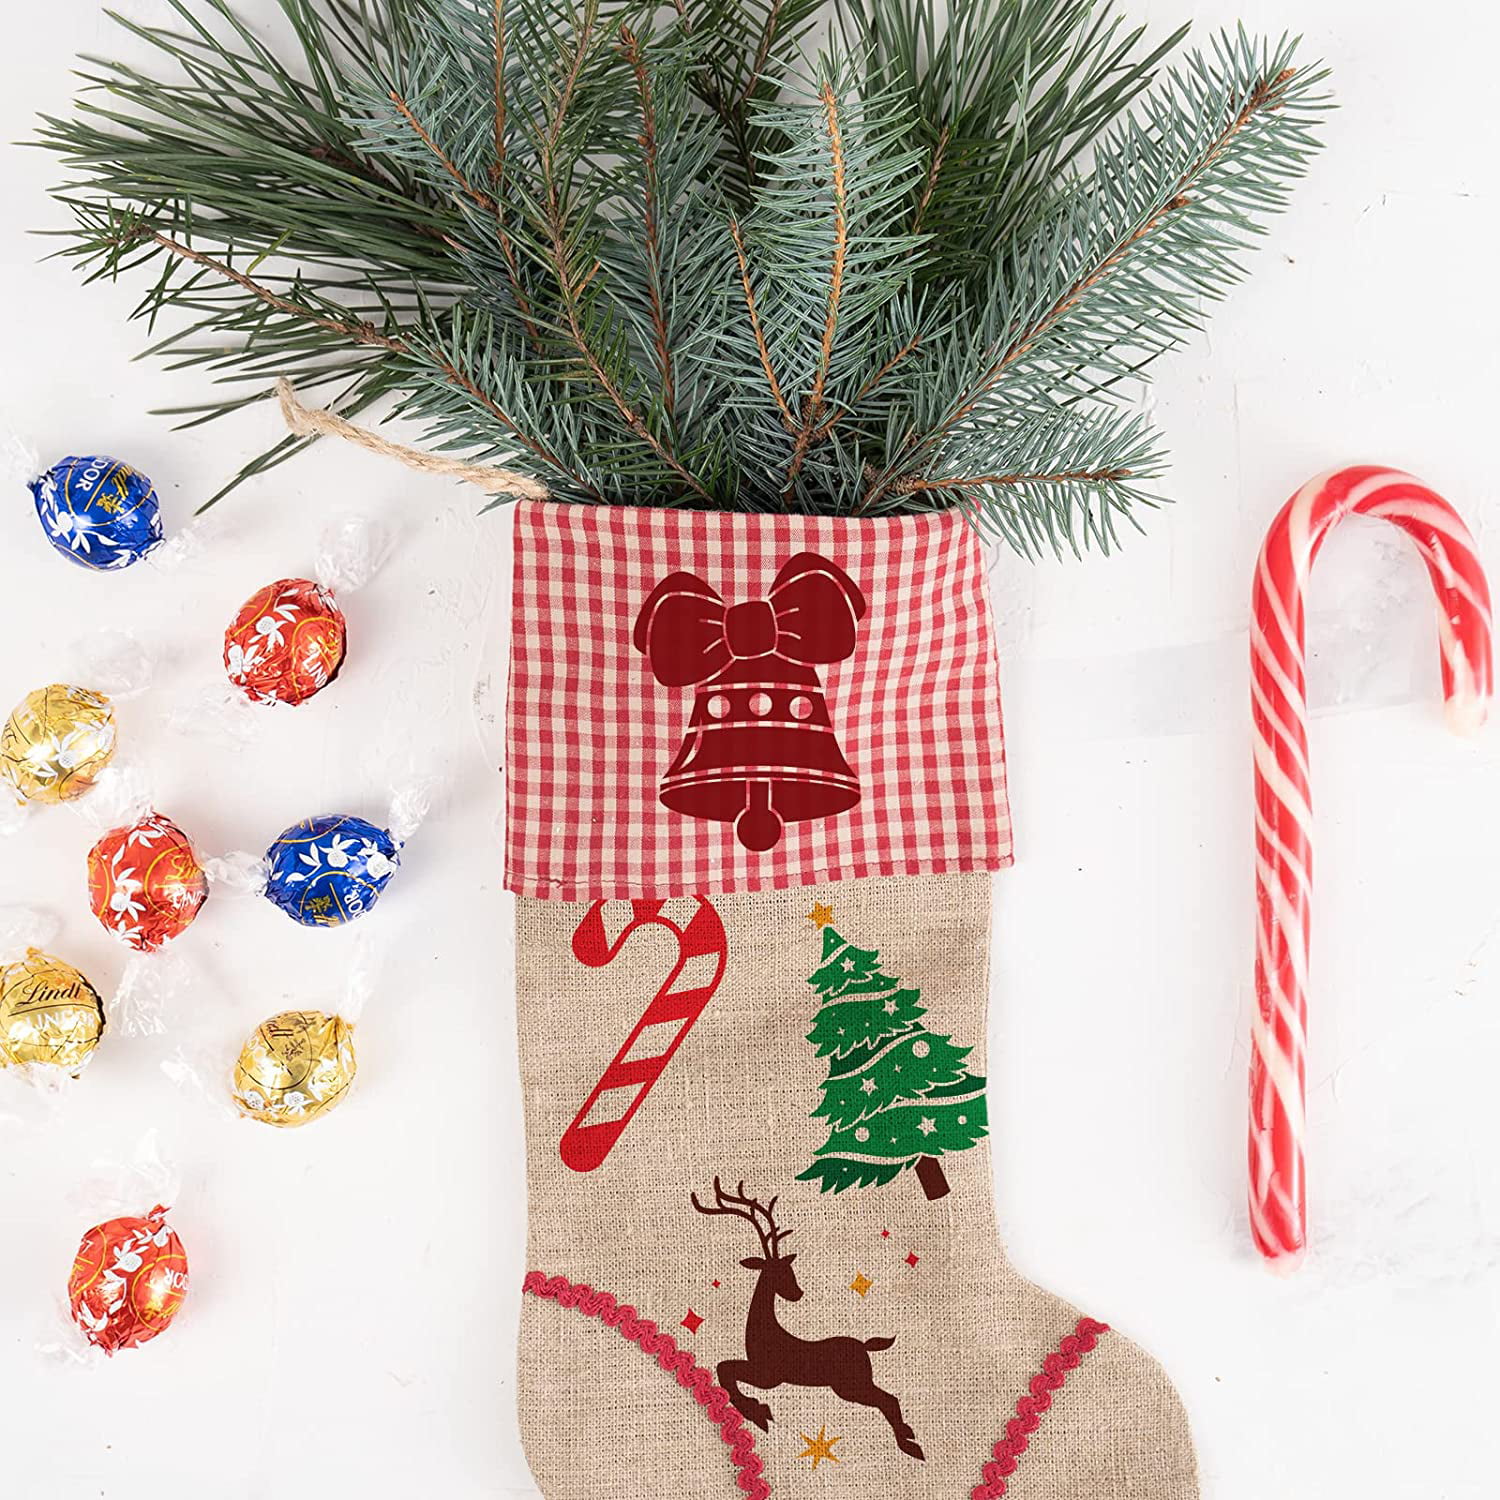 DIY Projects - Christmas Stockings – Yowler & Shepps Stencils